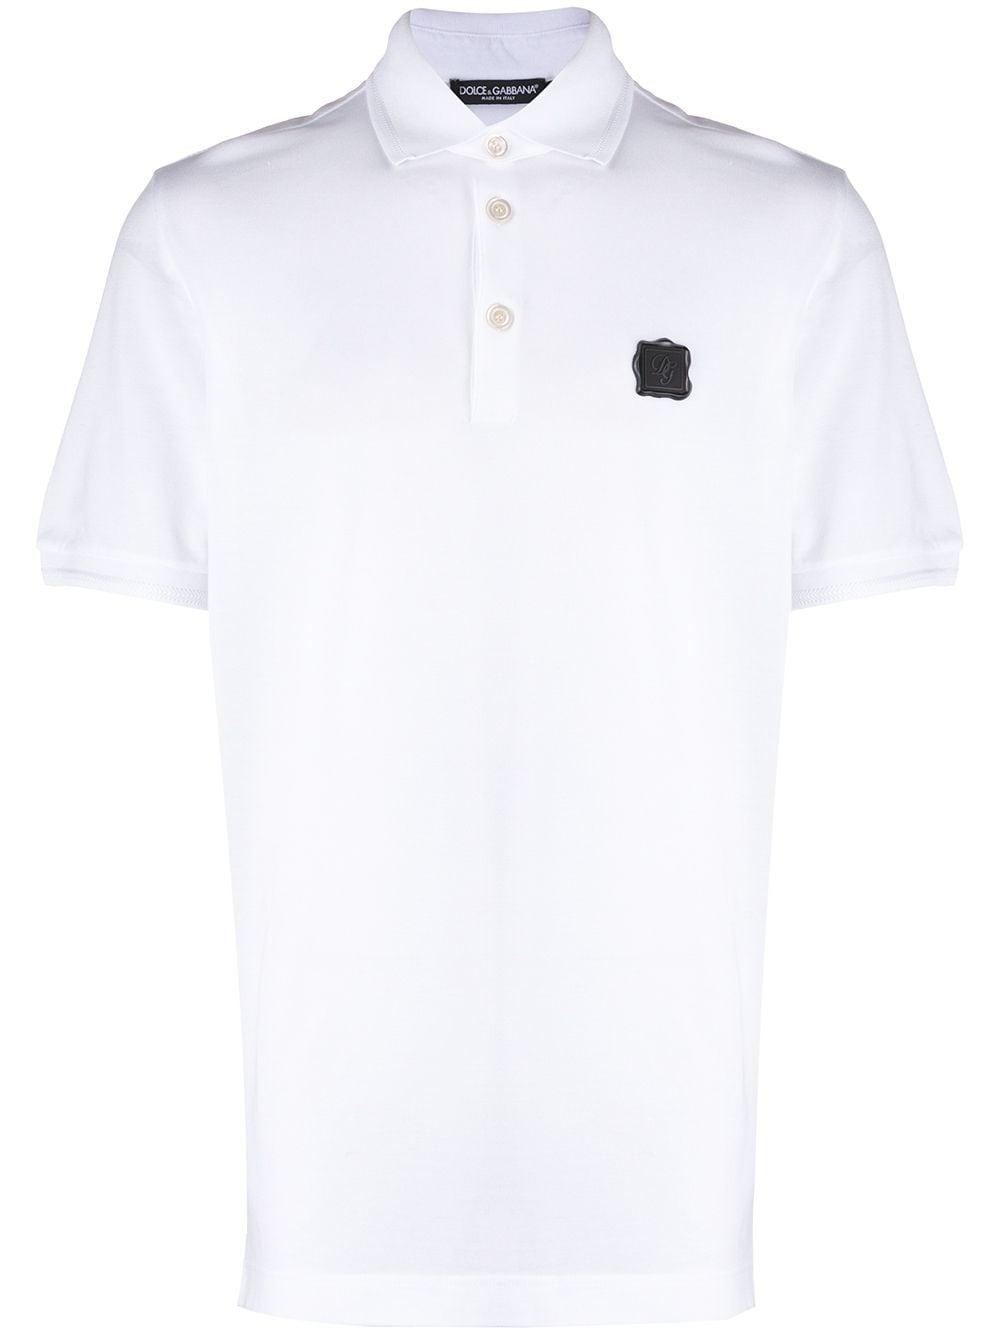 Dolce & Gabbana Cotton Dg Patch Polo Shirt in White for Men - Lyst